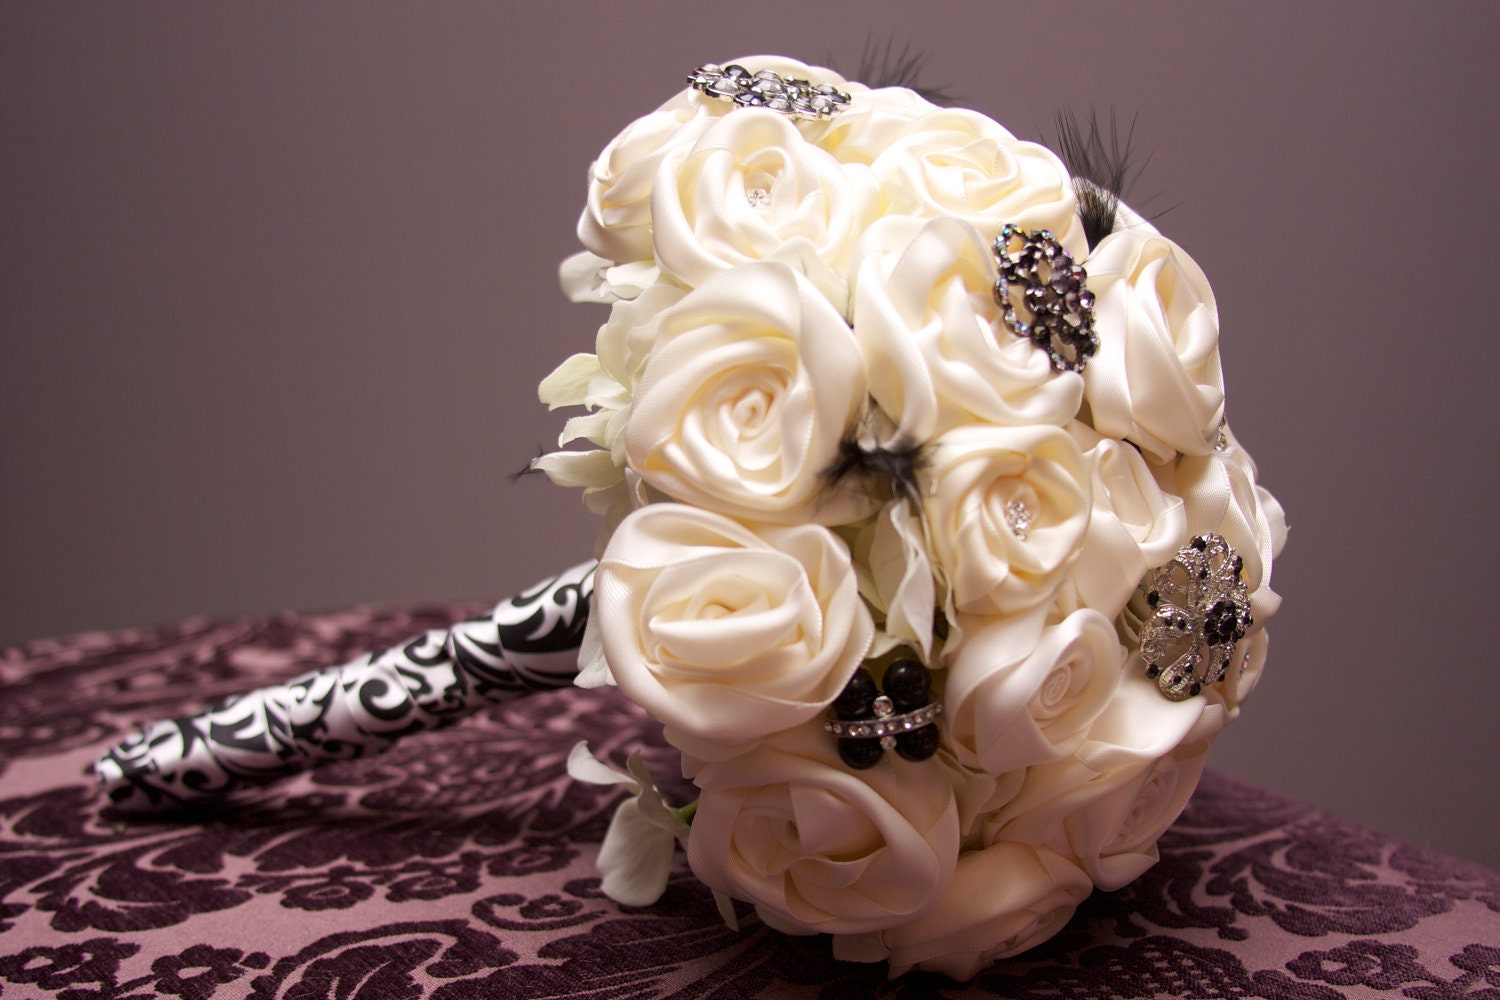 Black and White Satin Bouquet